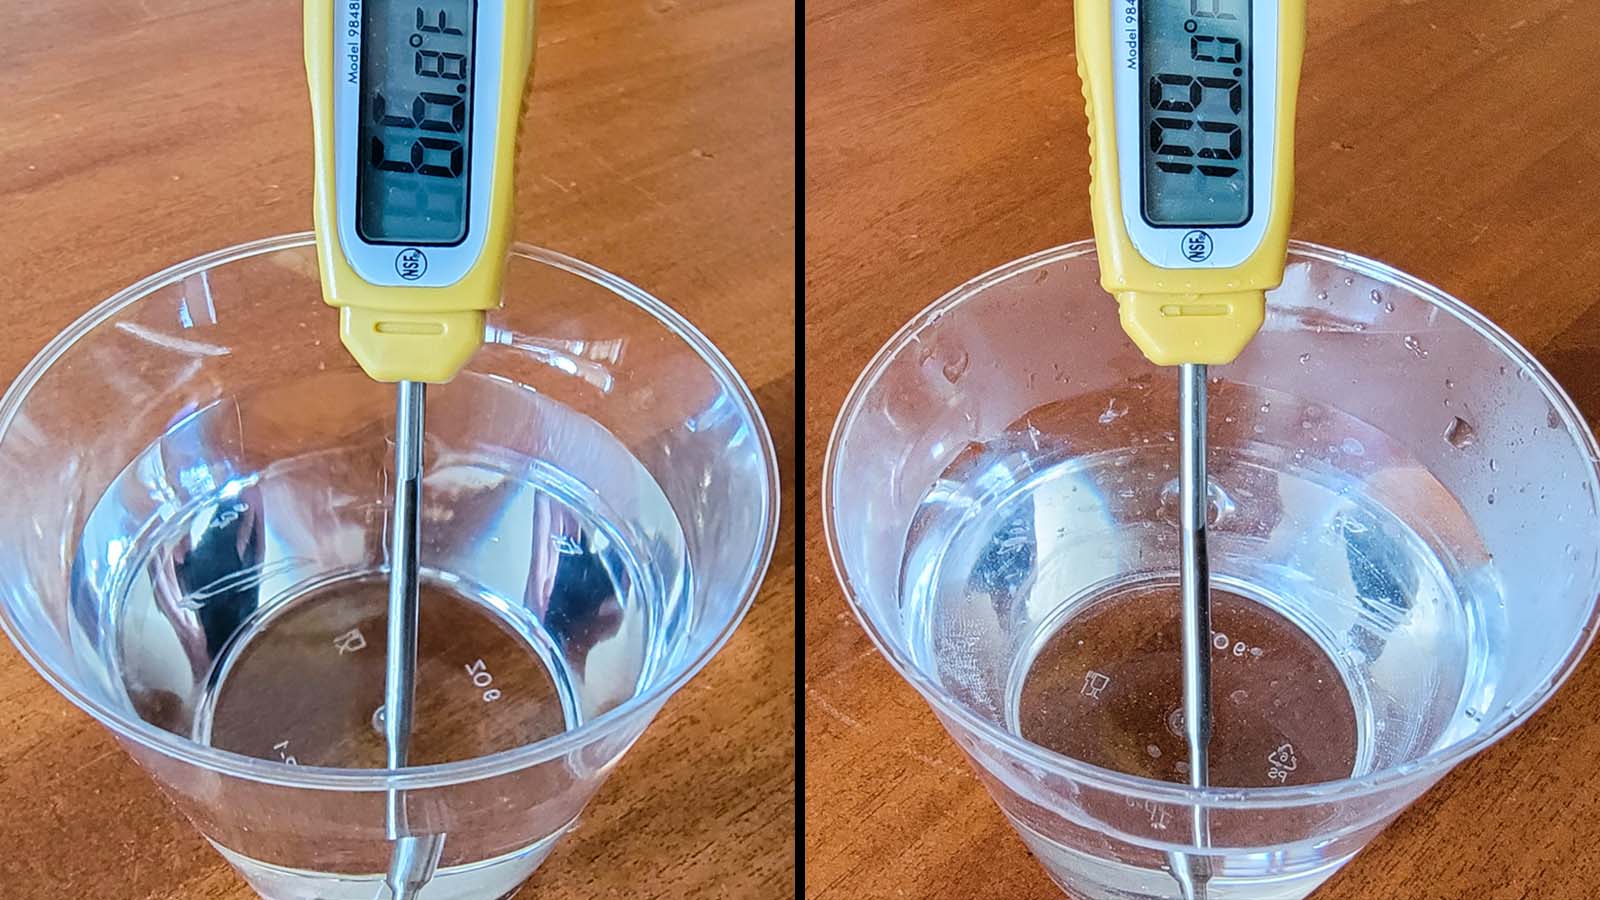 Side by side images of a thermometer in a clear plastic cub filled with water. The thermometer on the left reads 66 F while the one on the right reads 109 F.